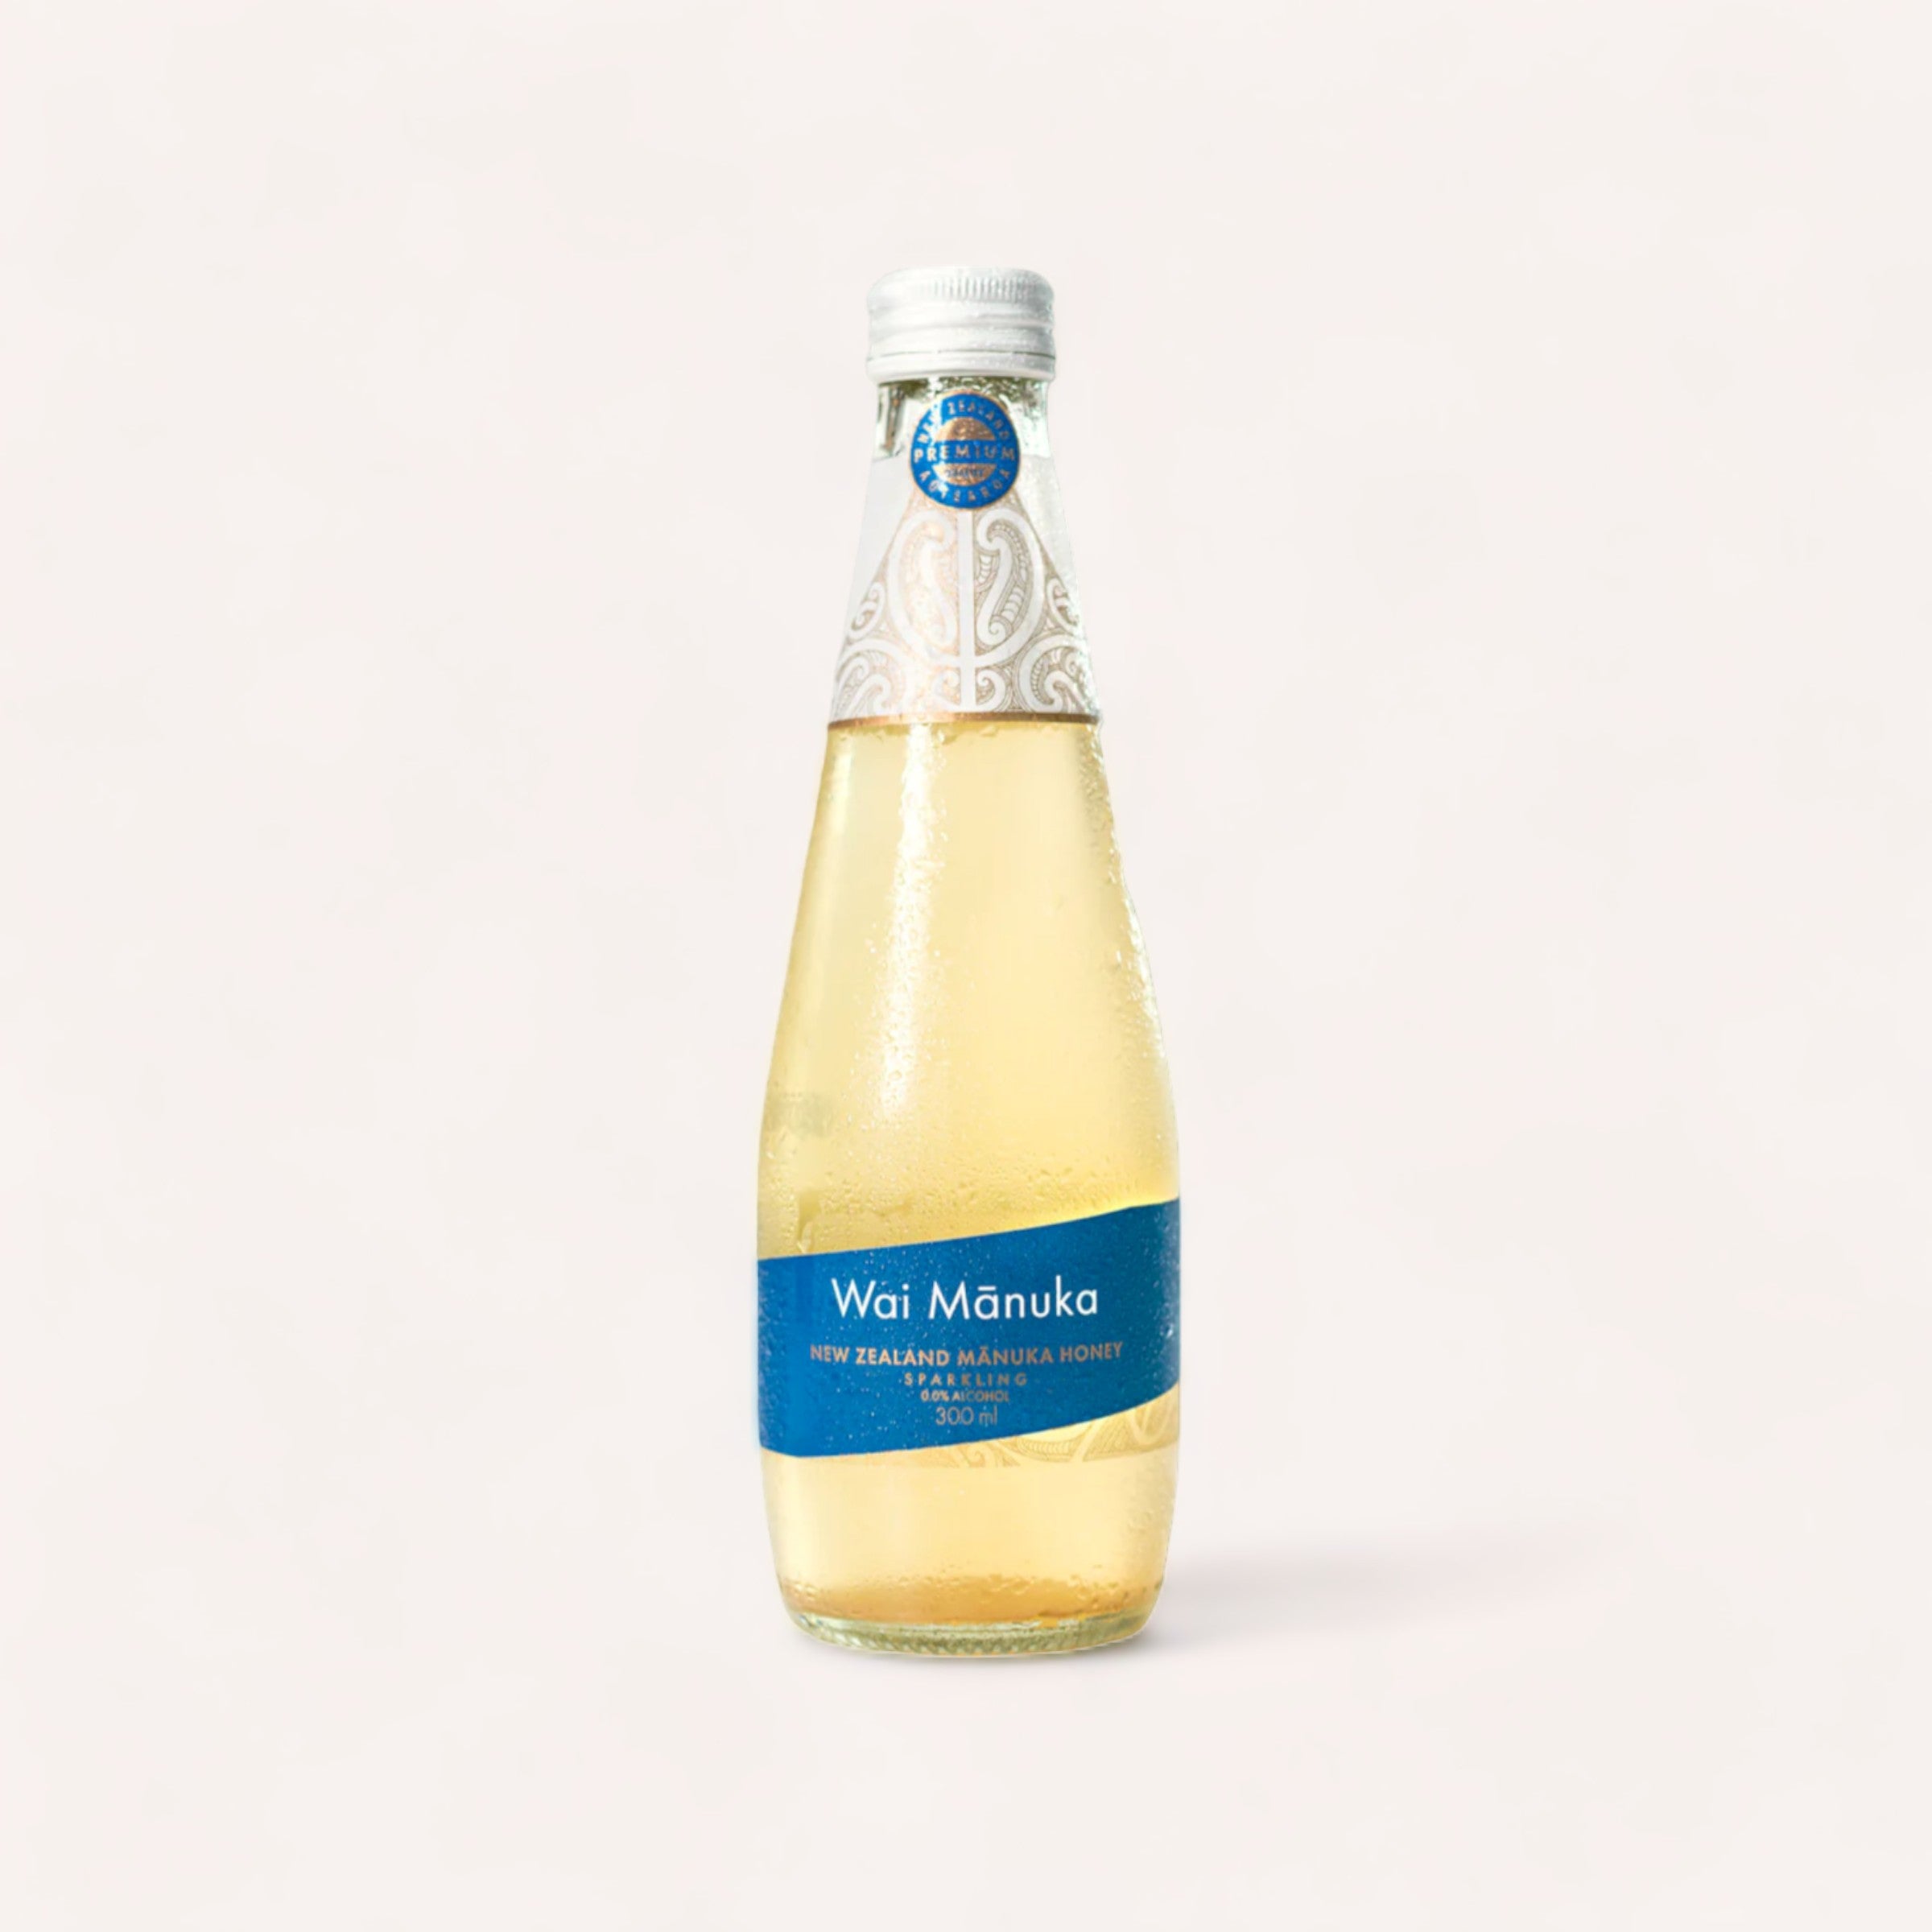 A bottle of Sparkling Honey & Lemon by Wai Manuka, promoting wellbeing against a clean, neutral background.